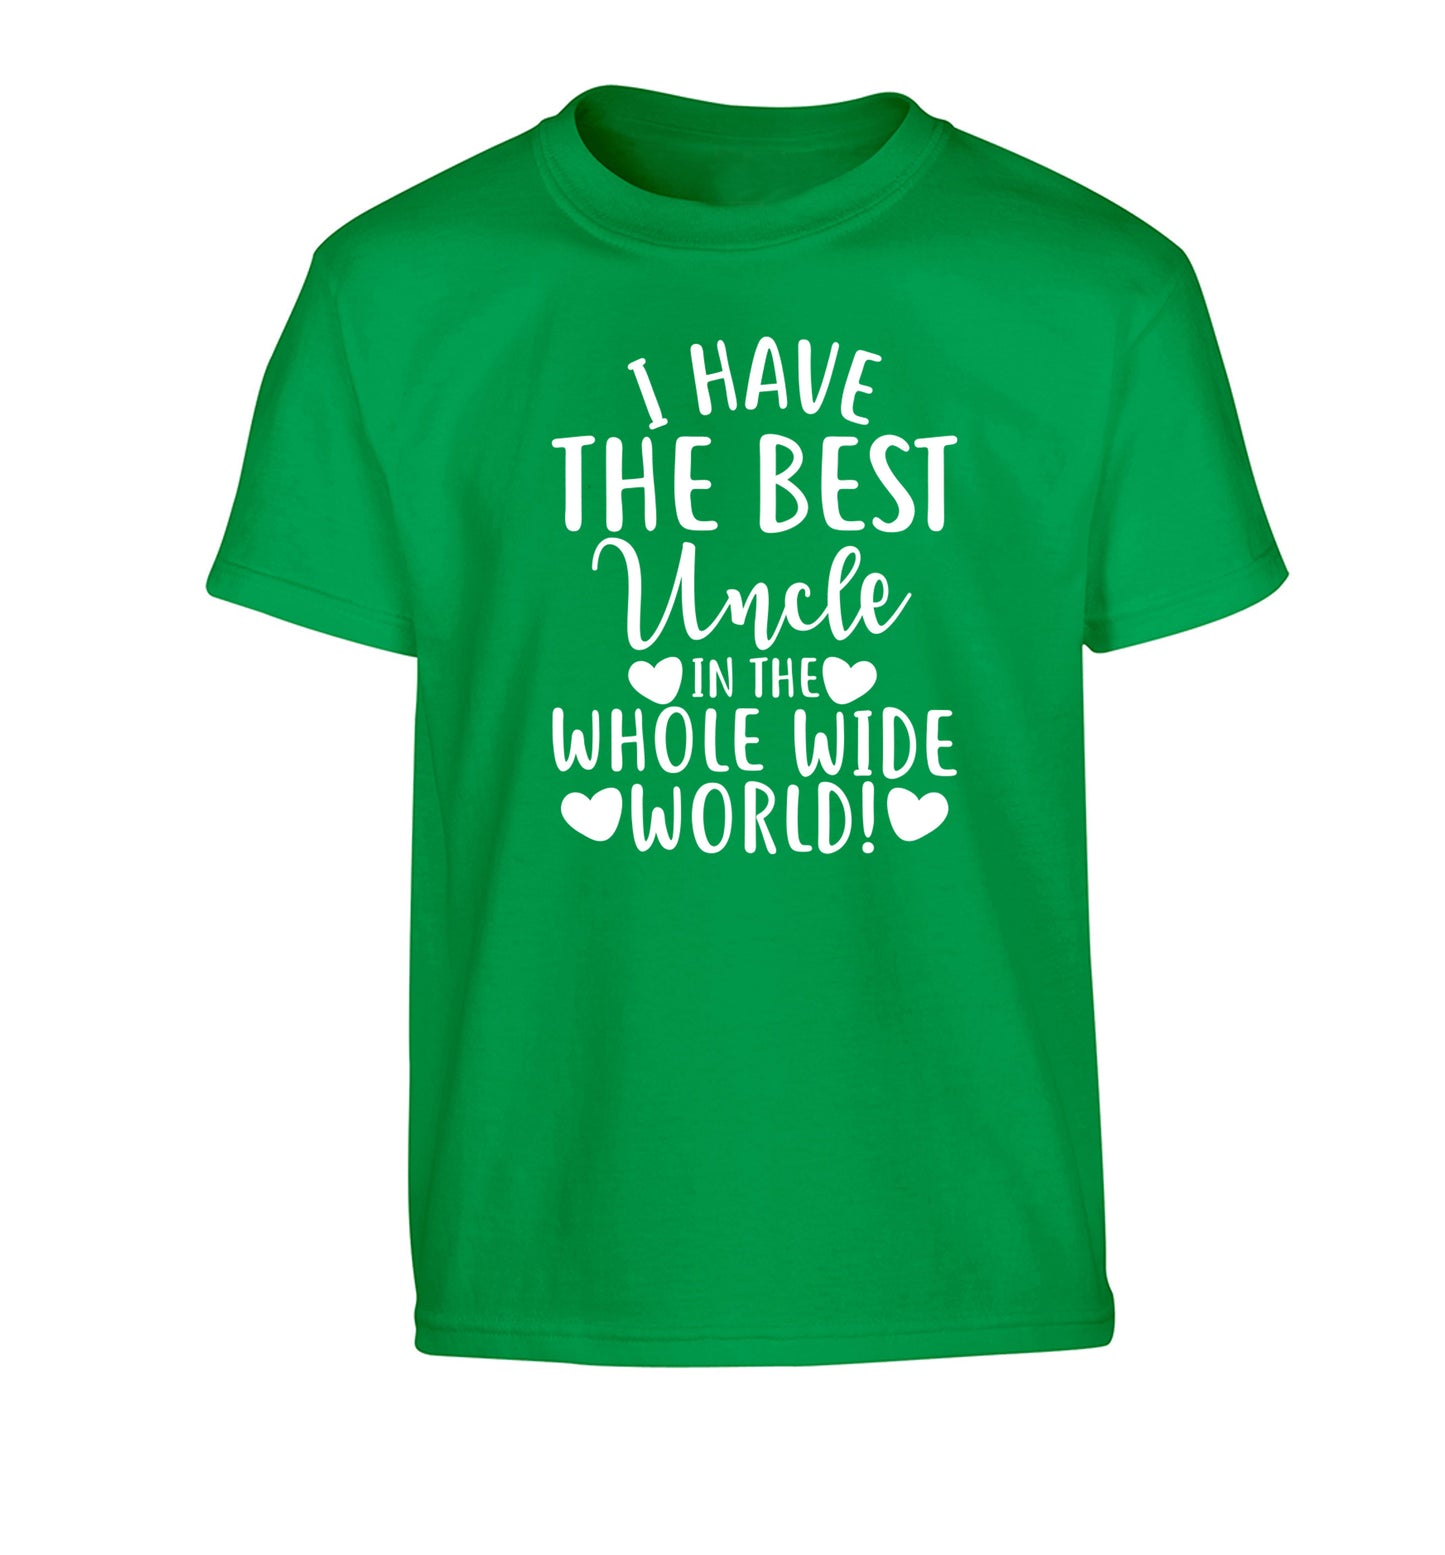 I have the best uncle in the whole wide world! Children's green Tshirt 12-13 Years